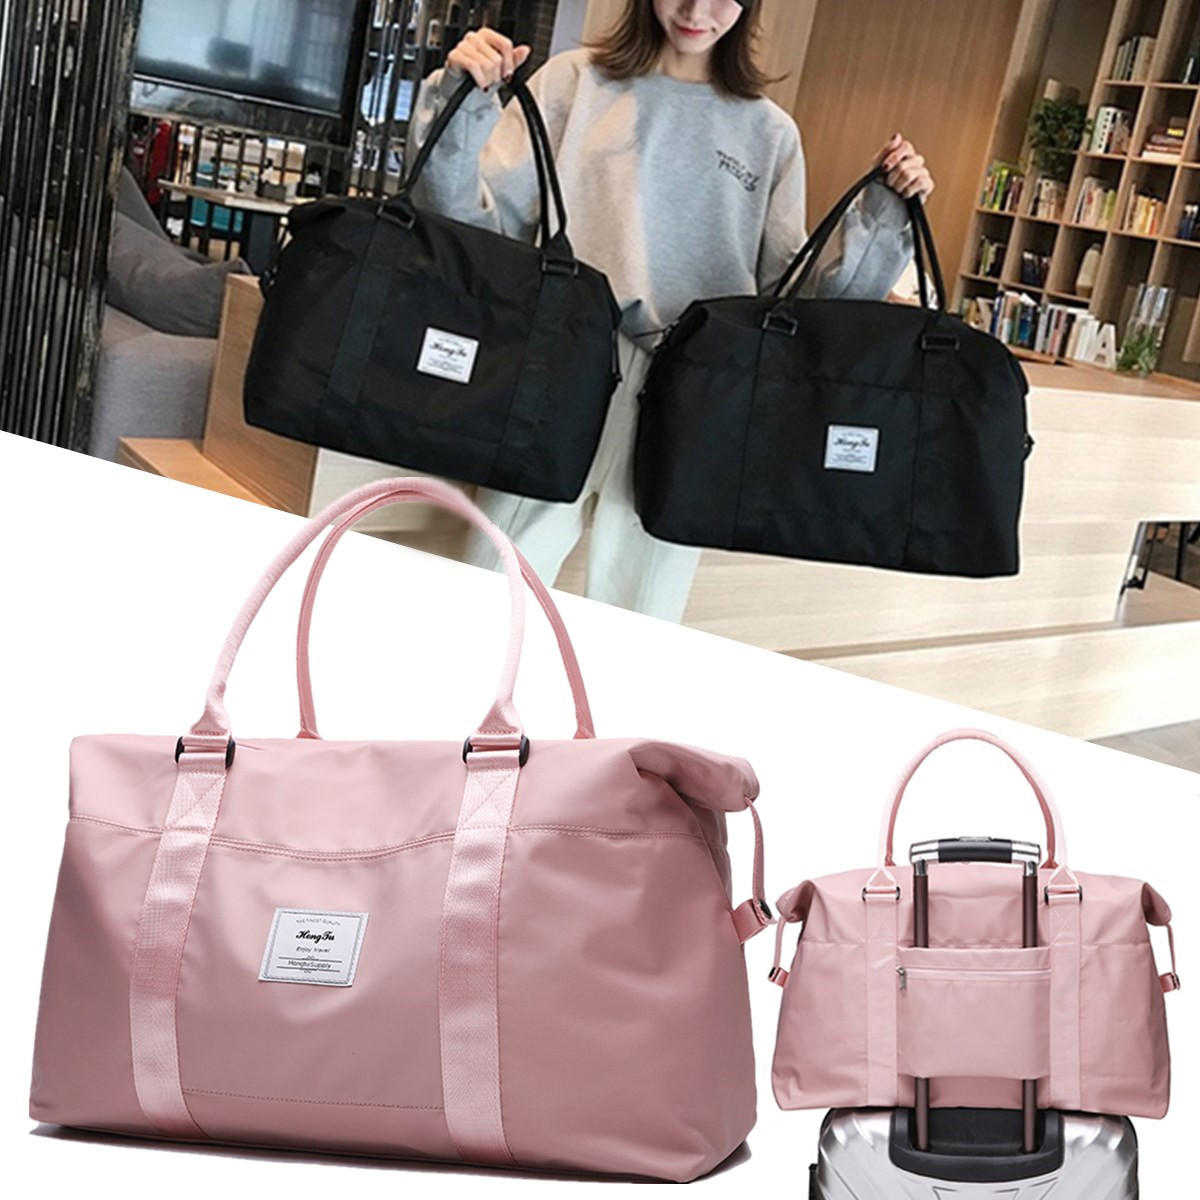 20L 30L Outdoor Portable Travel Handbag Waterproof Luggage Sports Gym Bag Carry On Tote 